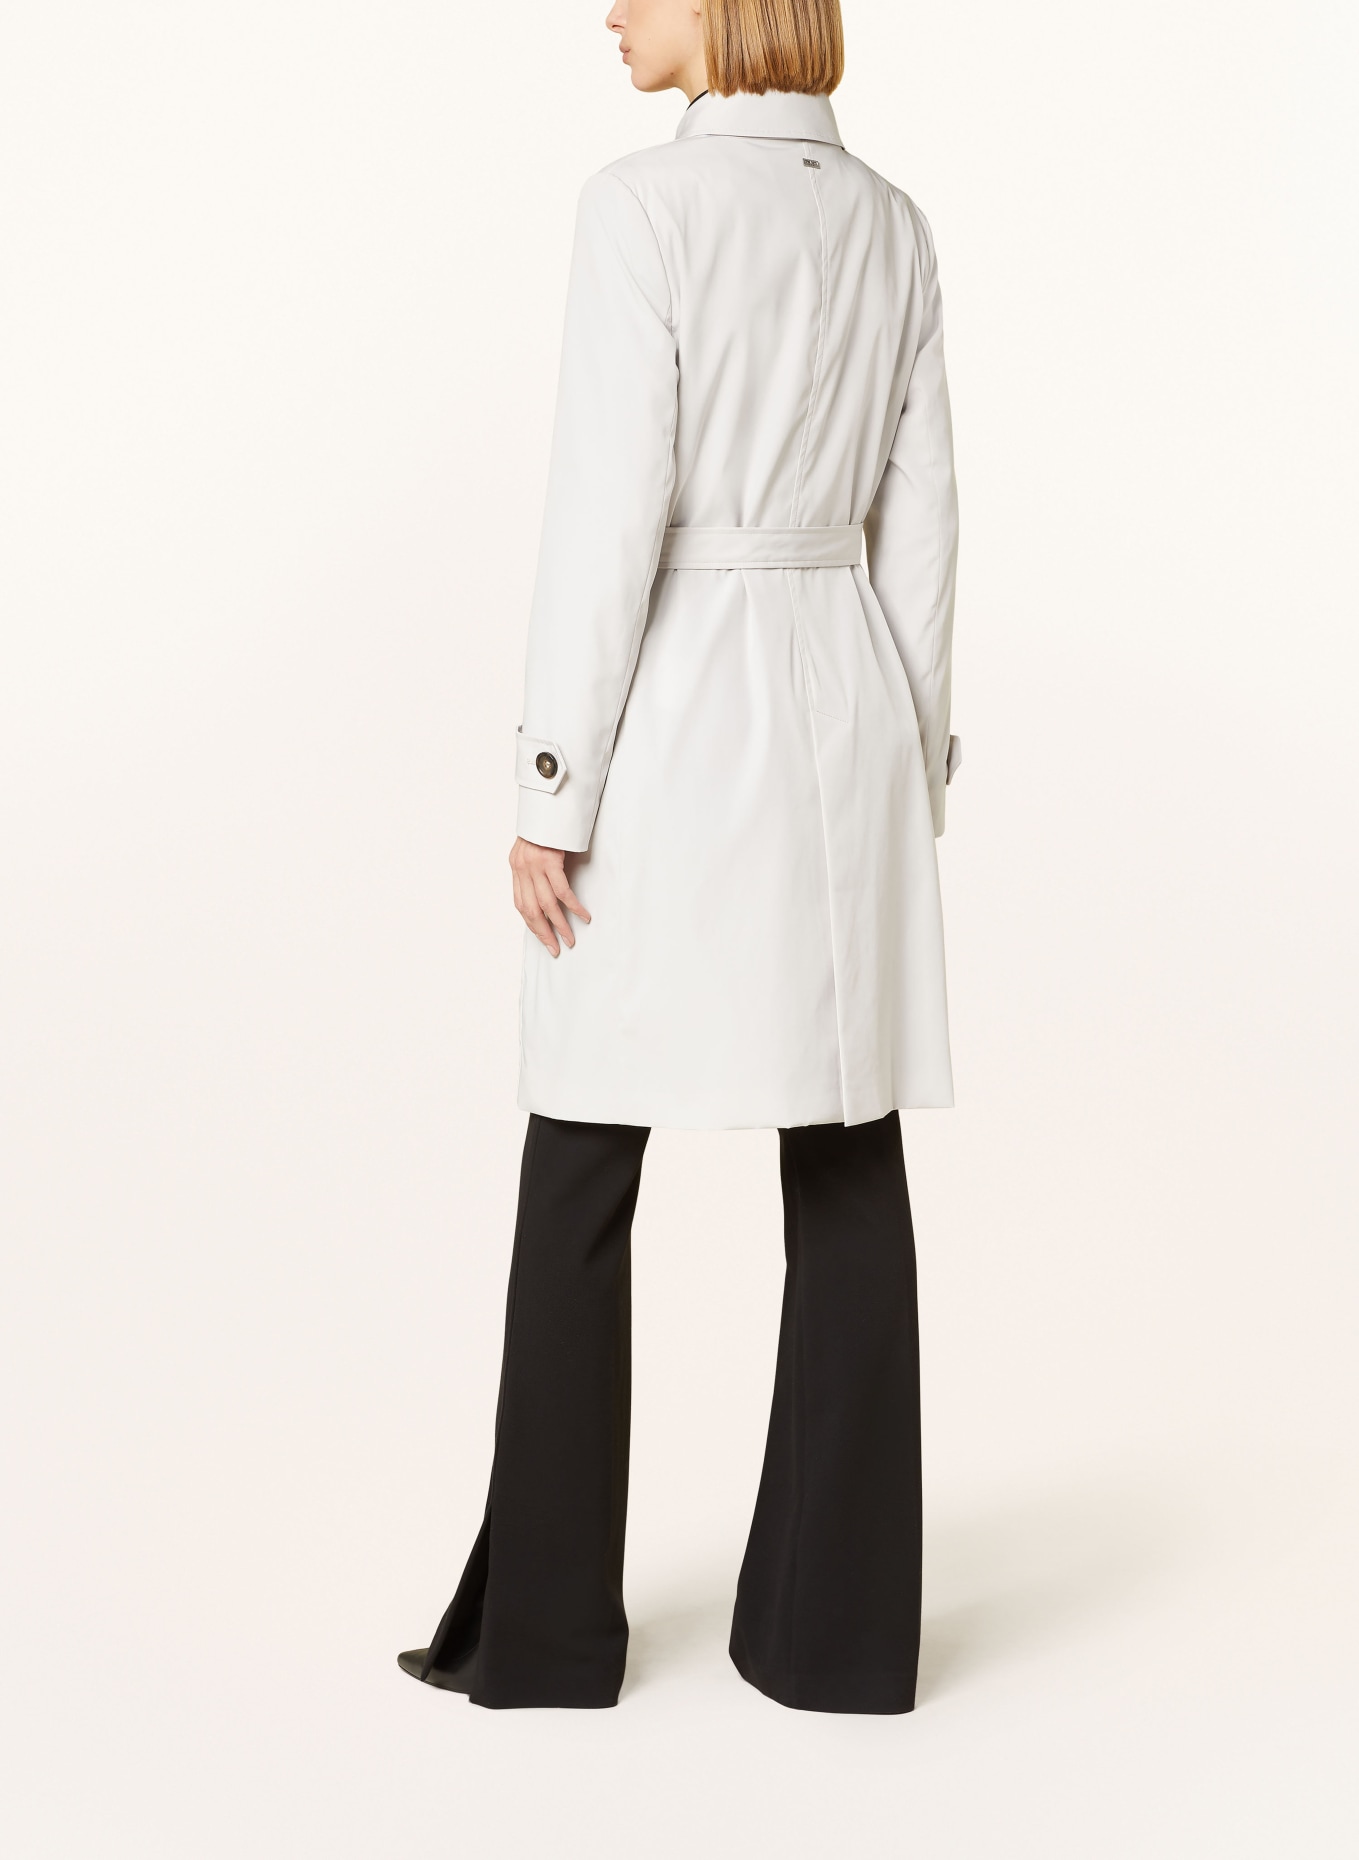 ICONS CINZIA ROCCA Trench coat, Color: LIGHT GRAY (Image 3)